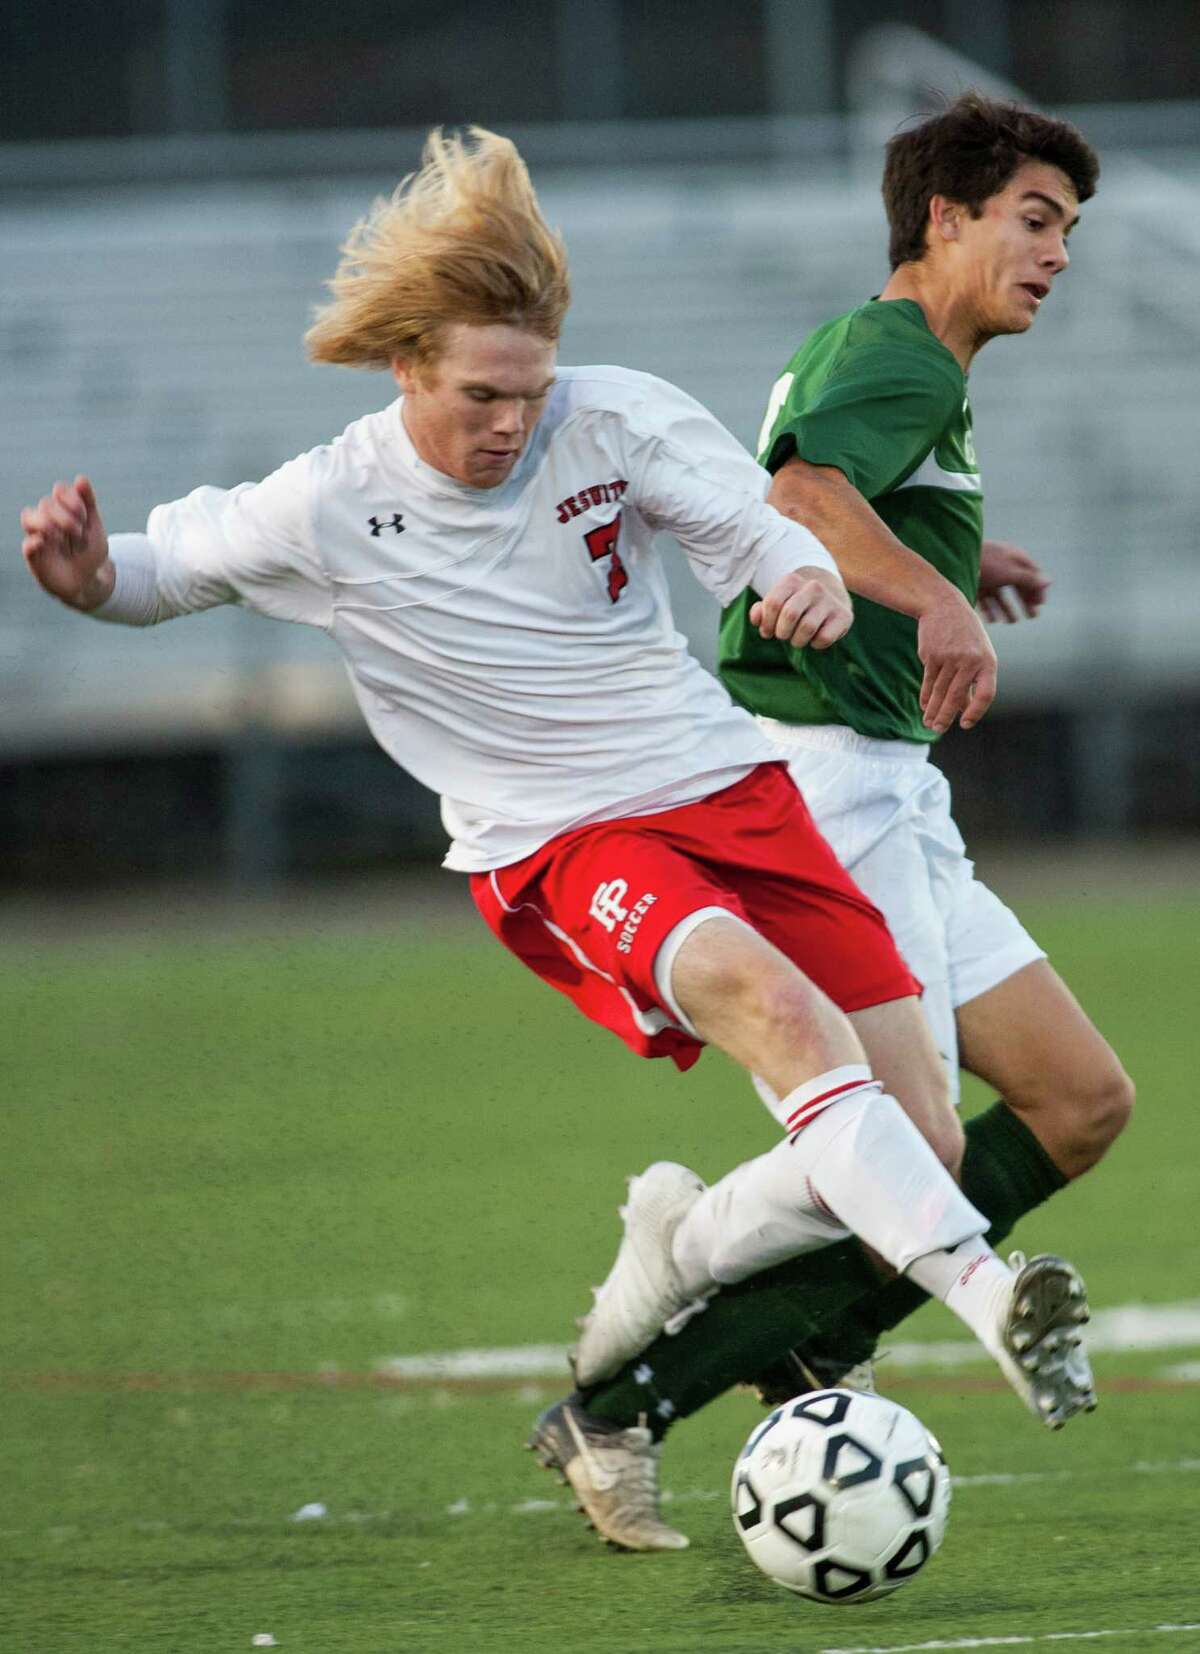 Fairfield Prep's Christopher Montani collides with New Milford high school's Nikolas Stefanatos during a first round game of the CIAC class LL boys soccer tournament played at Fairfield University, Fairfield, CT on Tuesday, November, 5th, 2013.